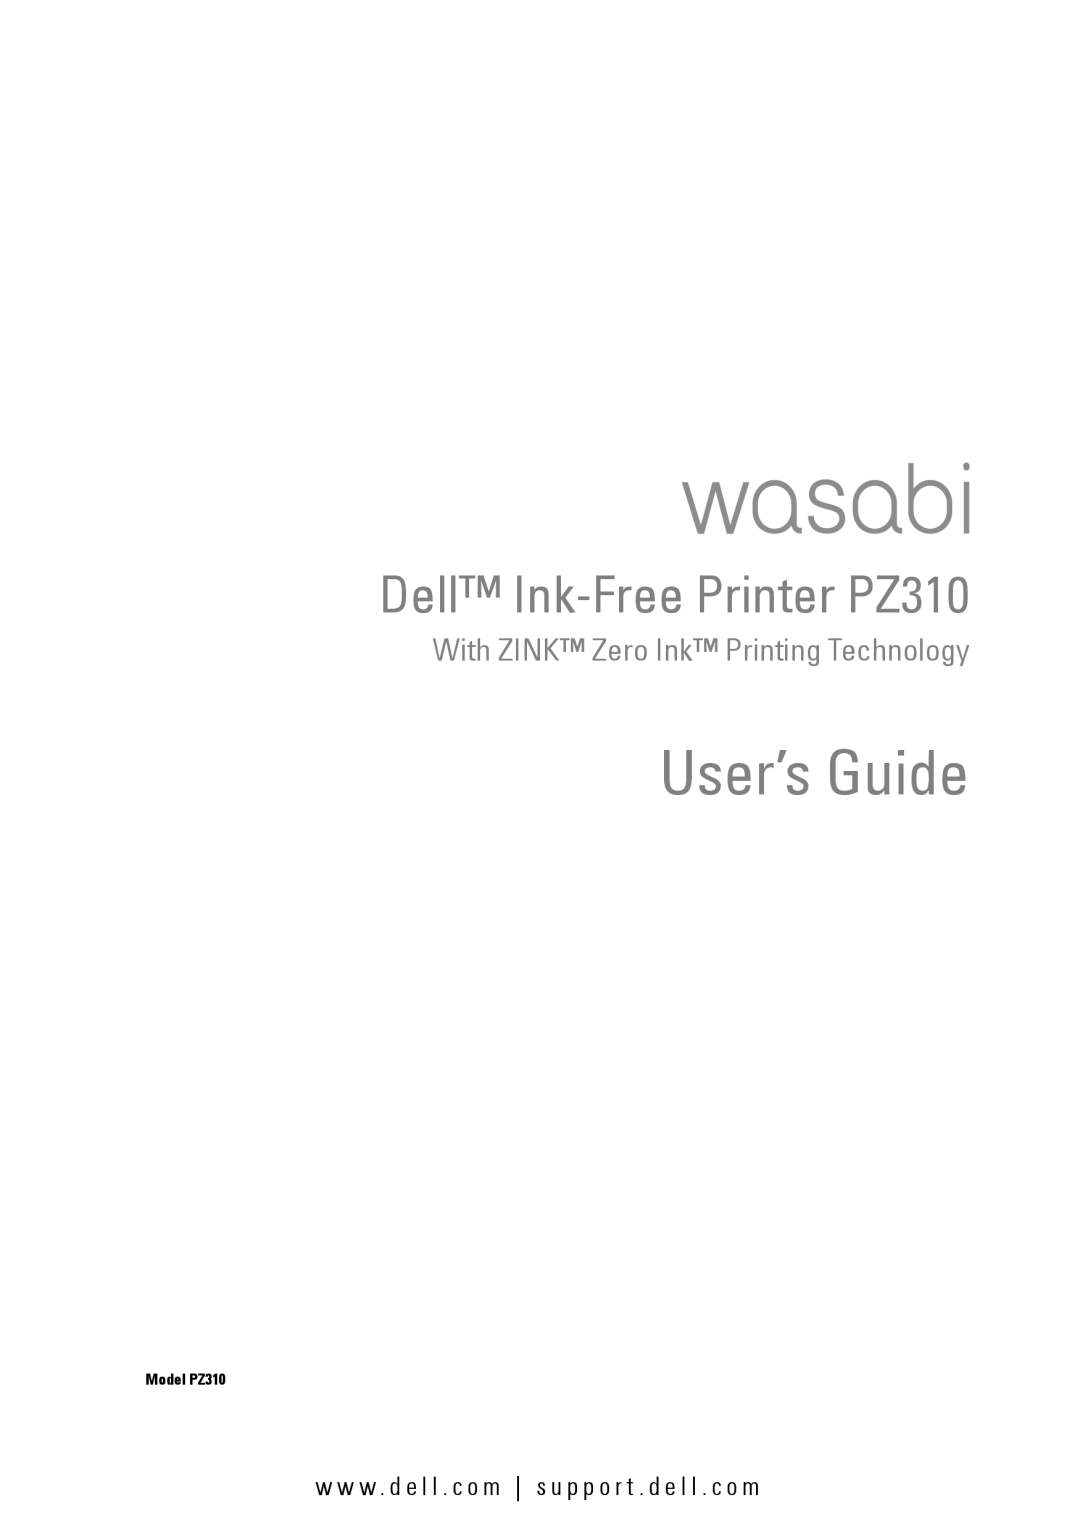 Dell manual User’s Guide, Dell Ink-Free Printer PZ310, With ZINK Zero Ink Printing Technology, Model PZ310 